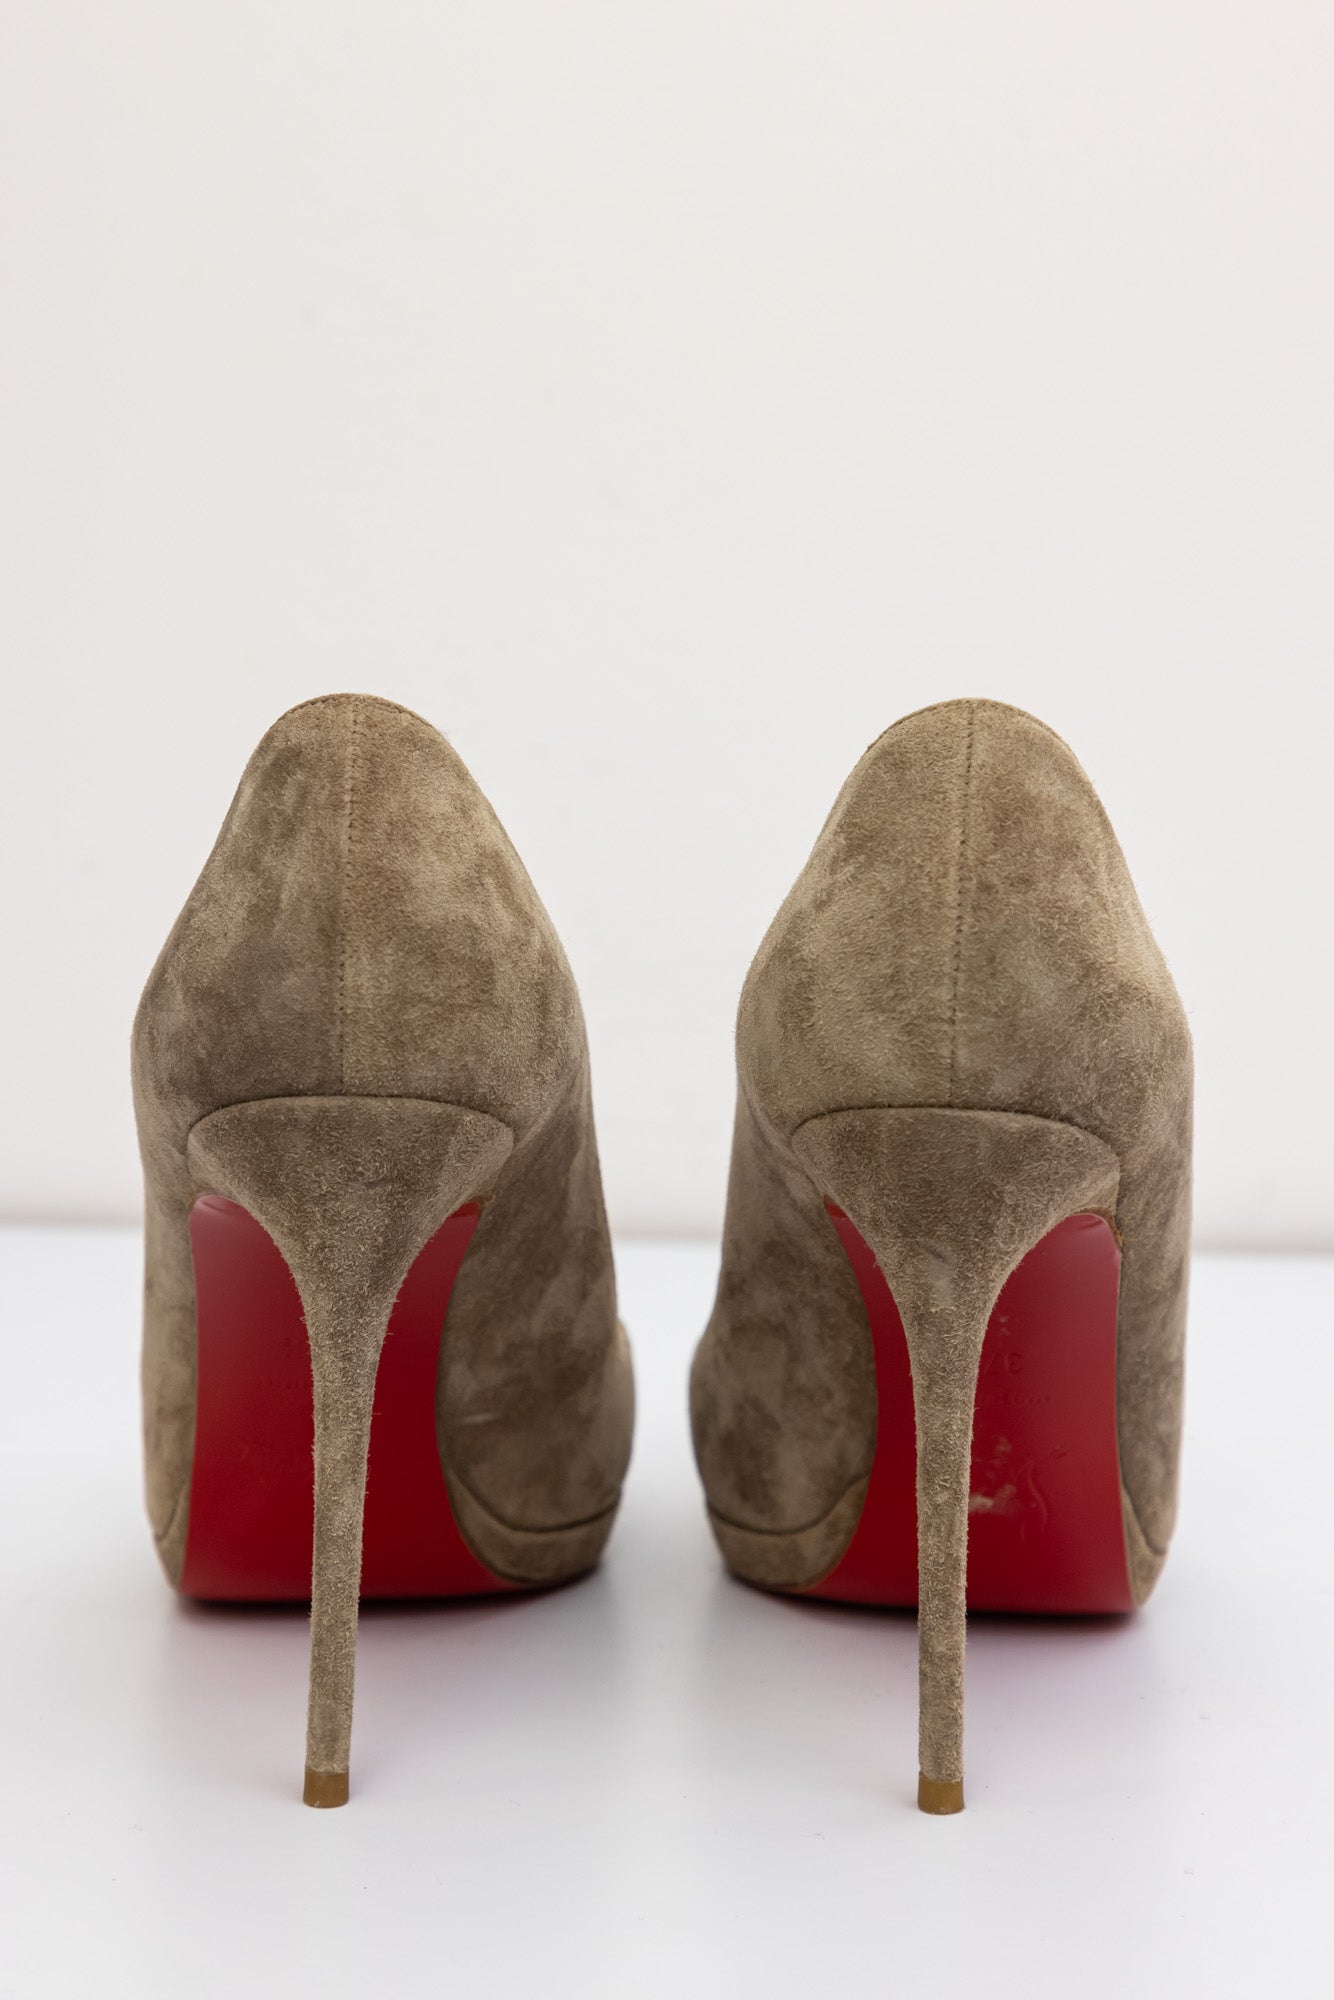 CHRISTIAN LOUBOUTIN Grey Suede Red Bottom Round Toe Pump Heels 